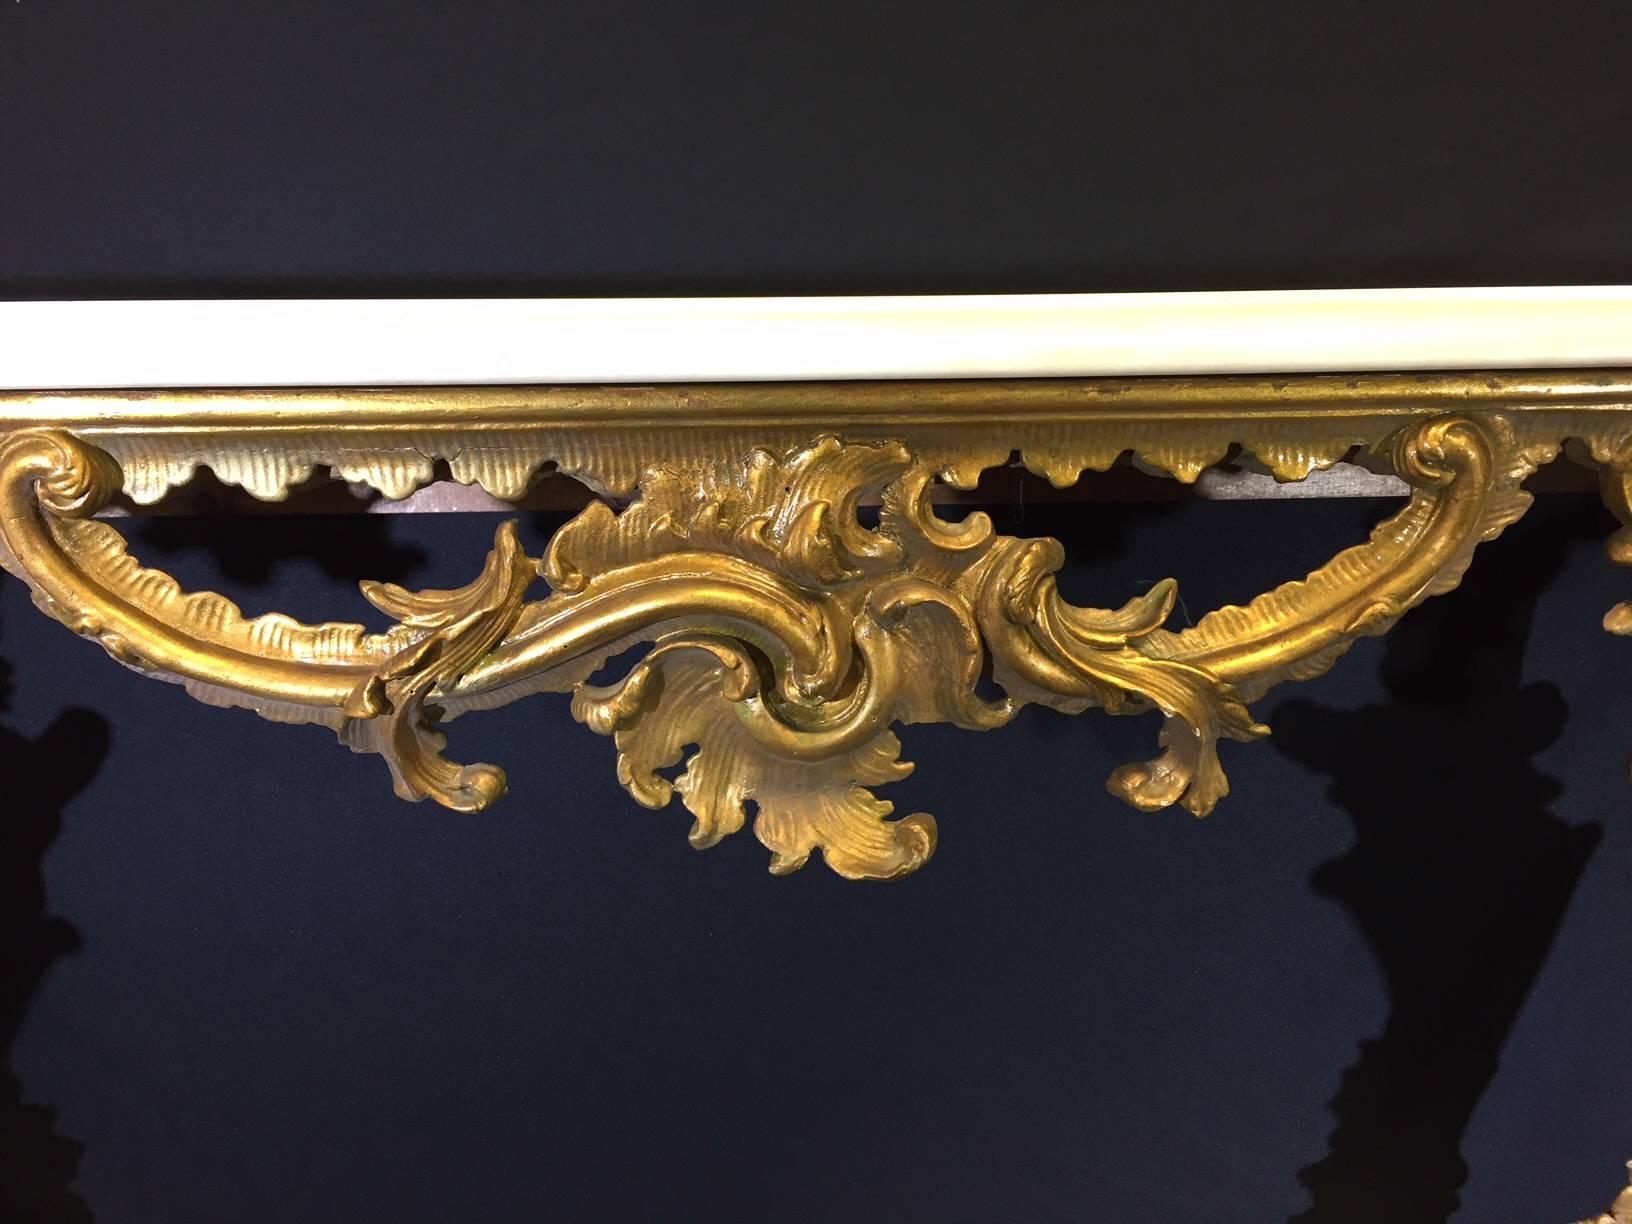 Hand-Carved Italian Rococo Giltwood Console, 18th Century